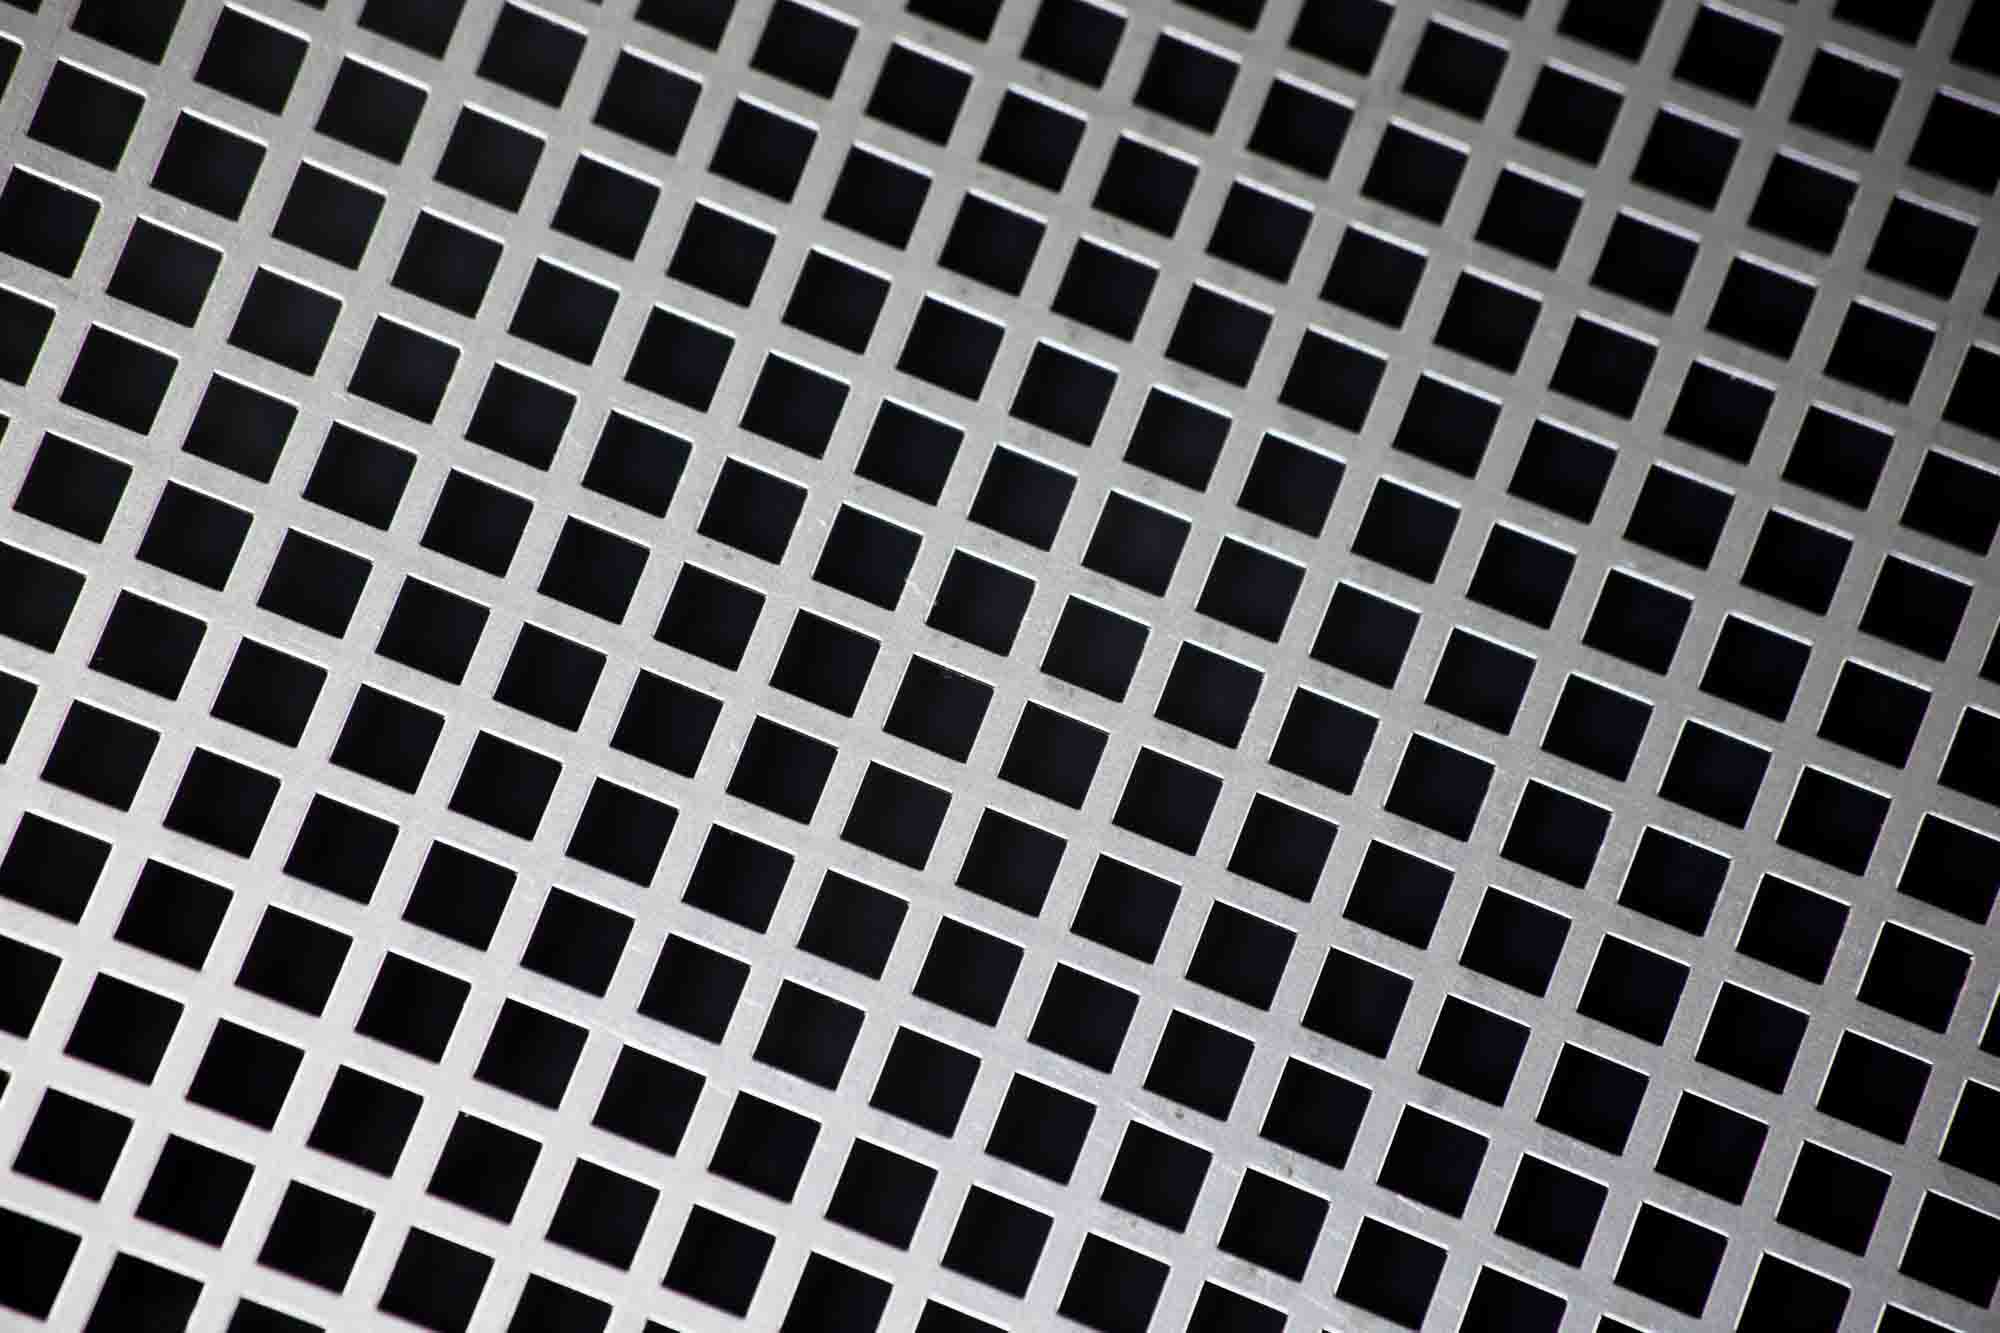 A close-up image of Stainless Steel Square Hole Perforated Metal.